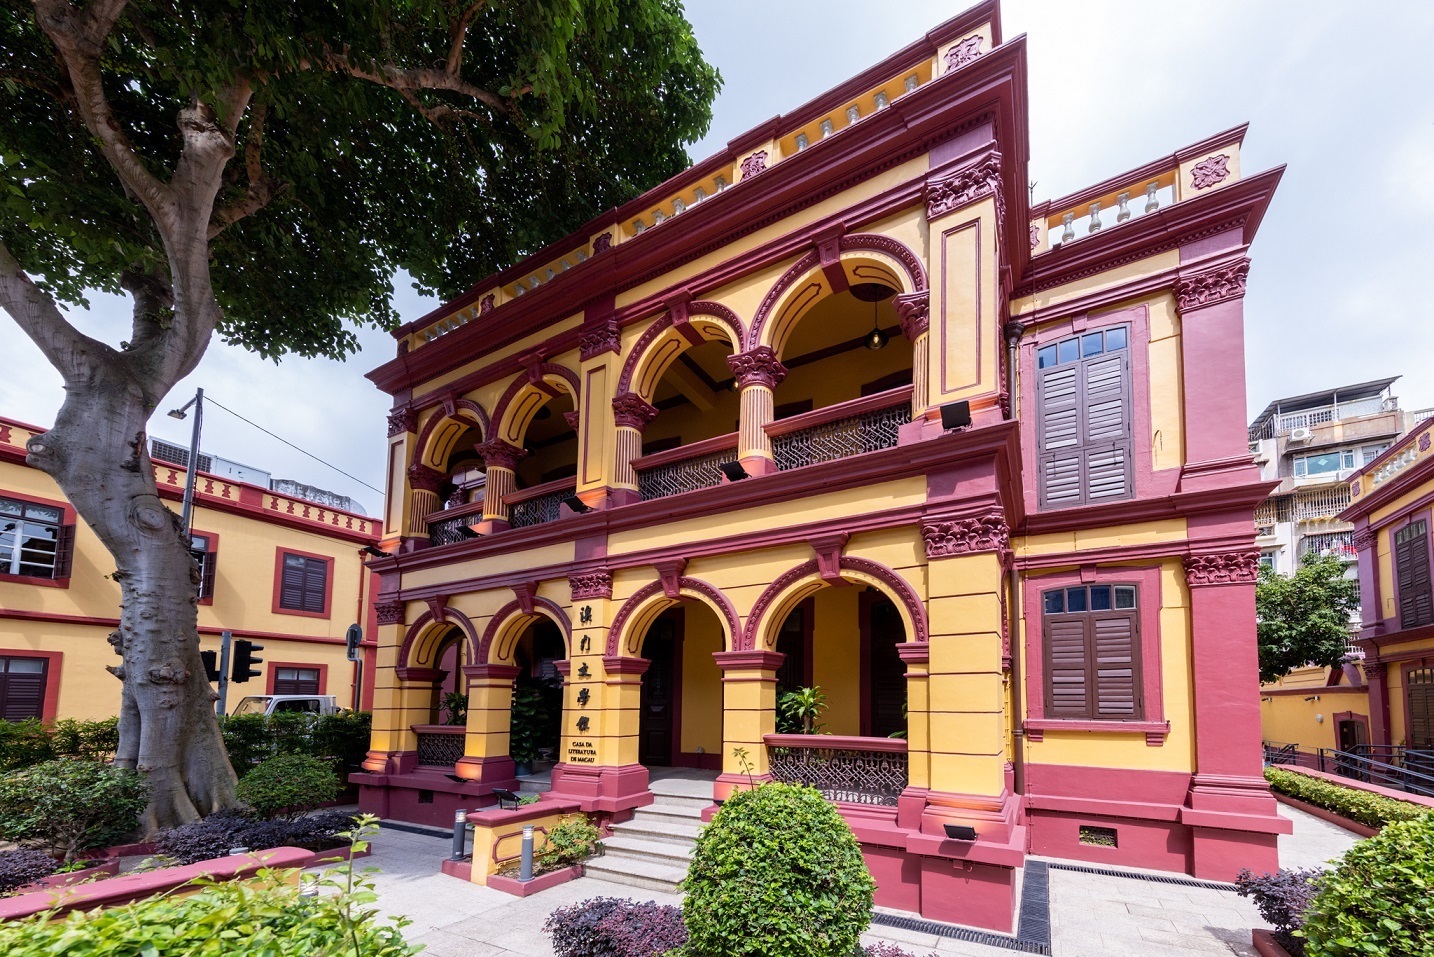 Macau Literature House to open by September